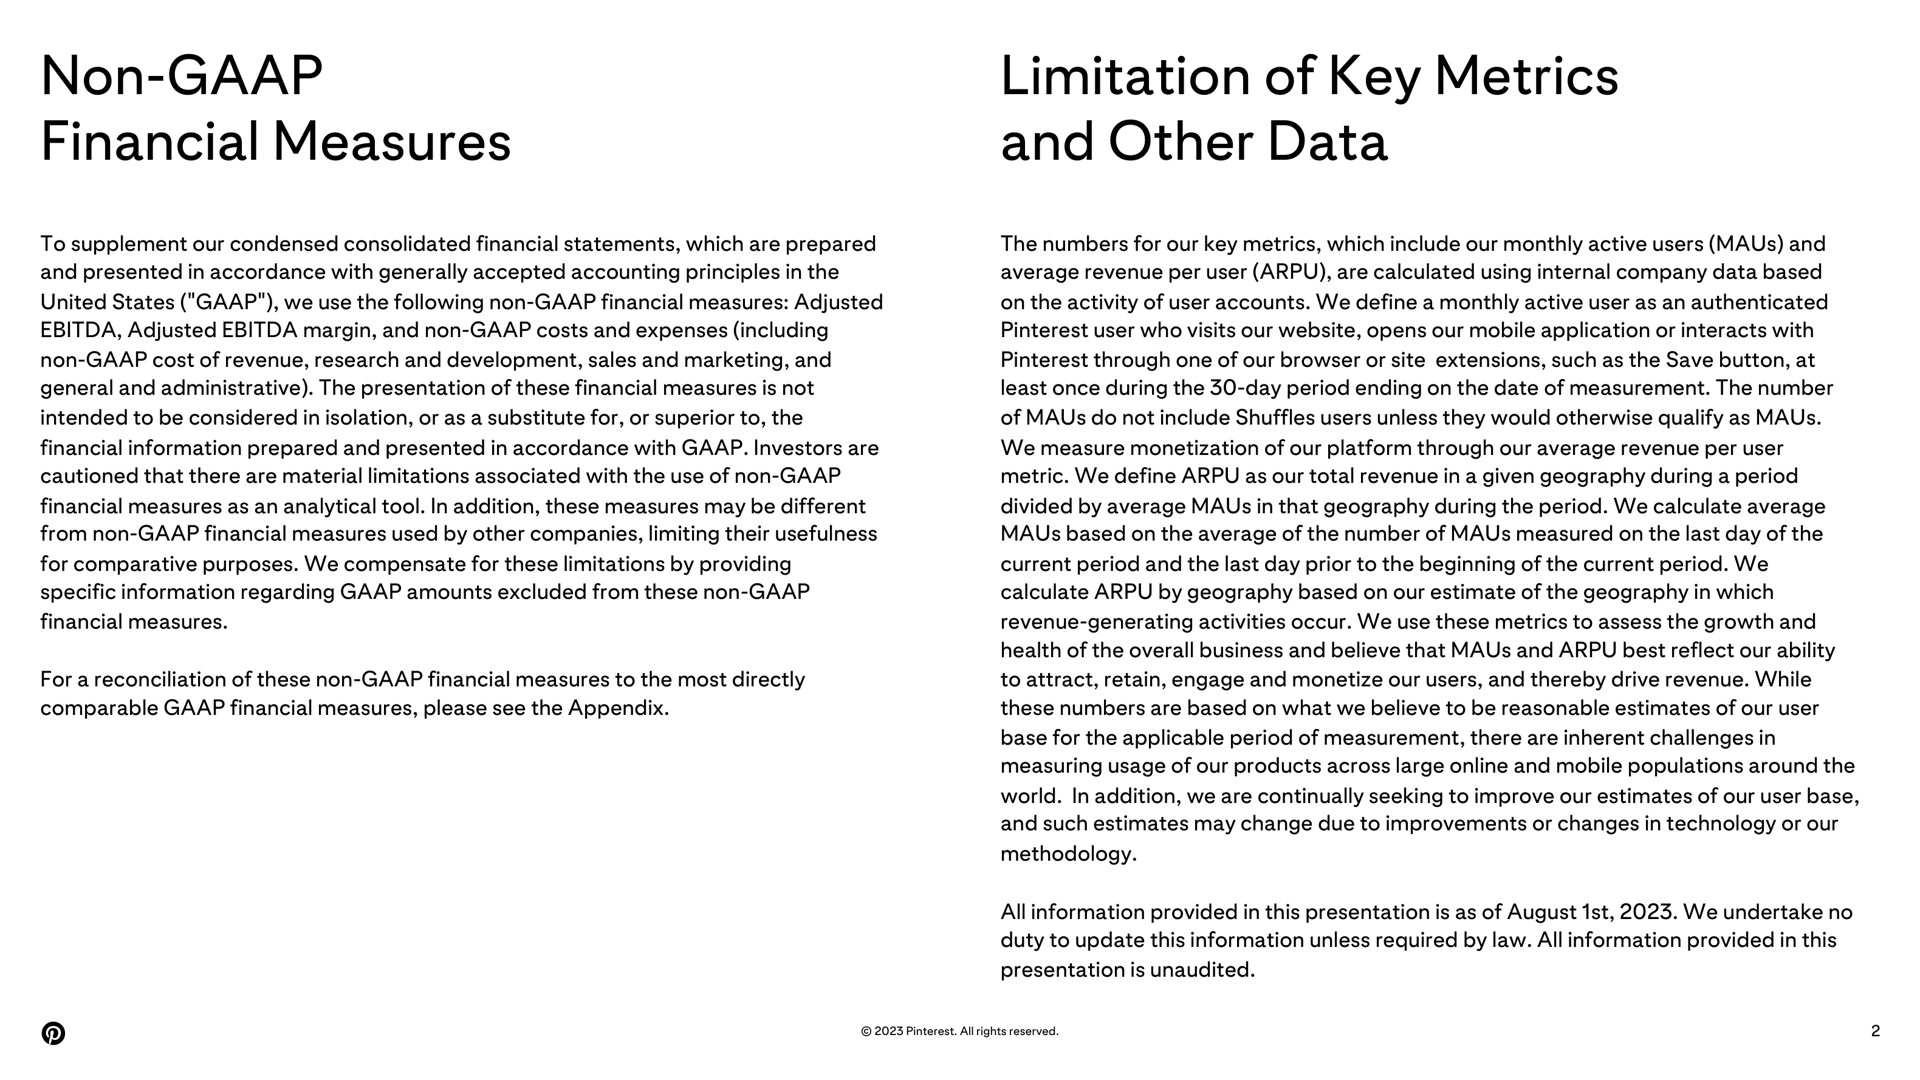 non financial measures limitation of key metrics and other data | Pinterest